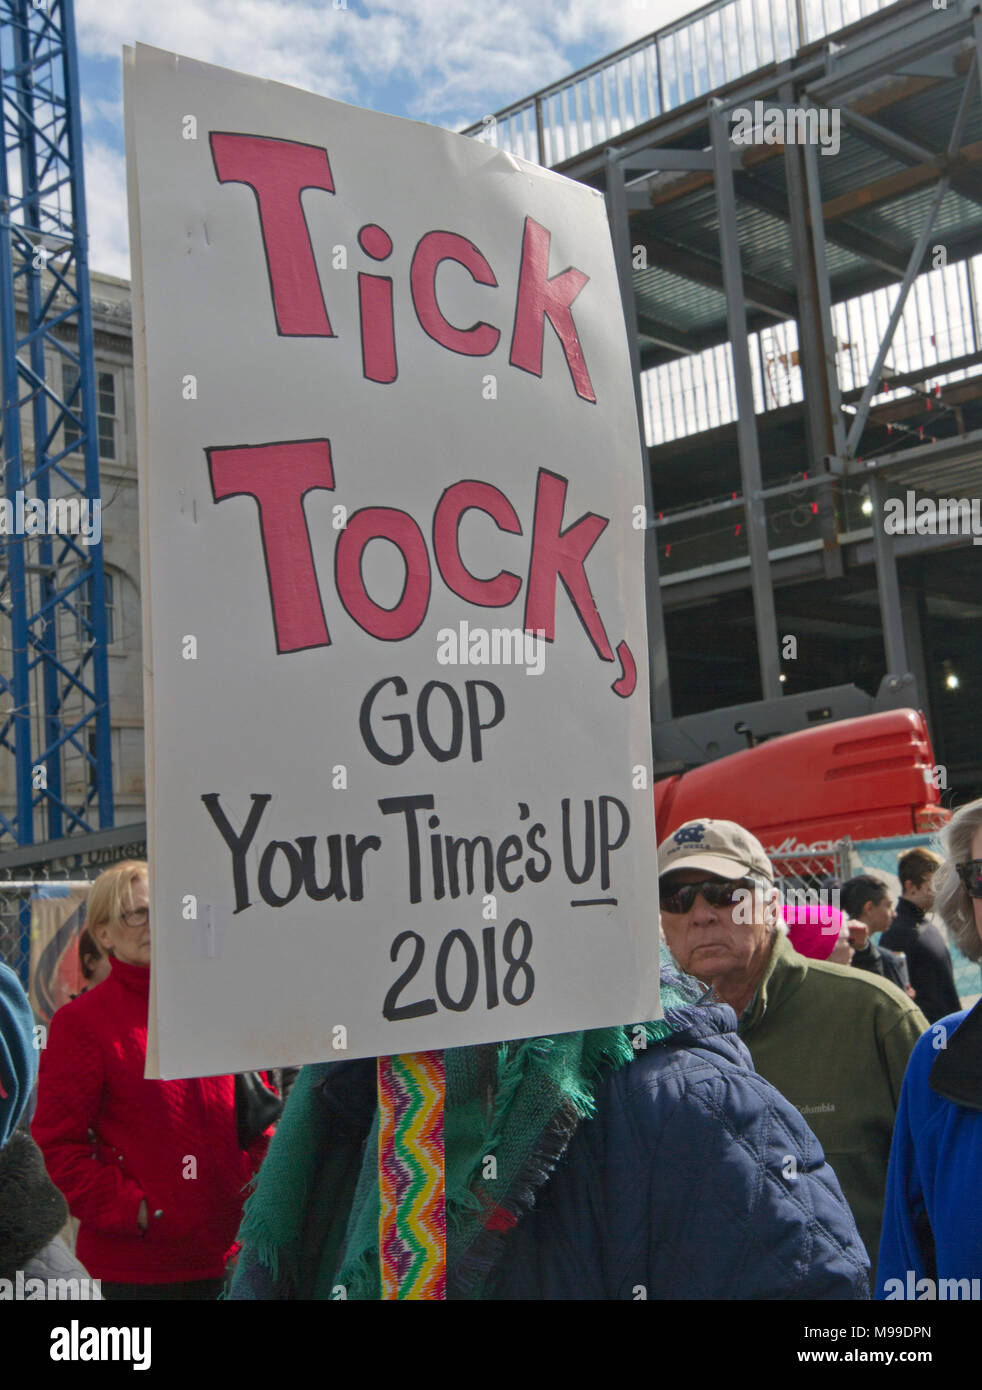 ASHEVILLE, NORTH CAROLINA - JANUARY 20, 2018: A women holds a sign saying 'Tick Tock, GOP Your Time's Up, 2018' during the 2018 Women's March promotin Stock Photo